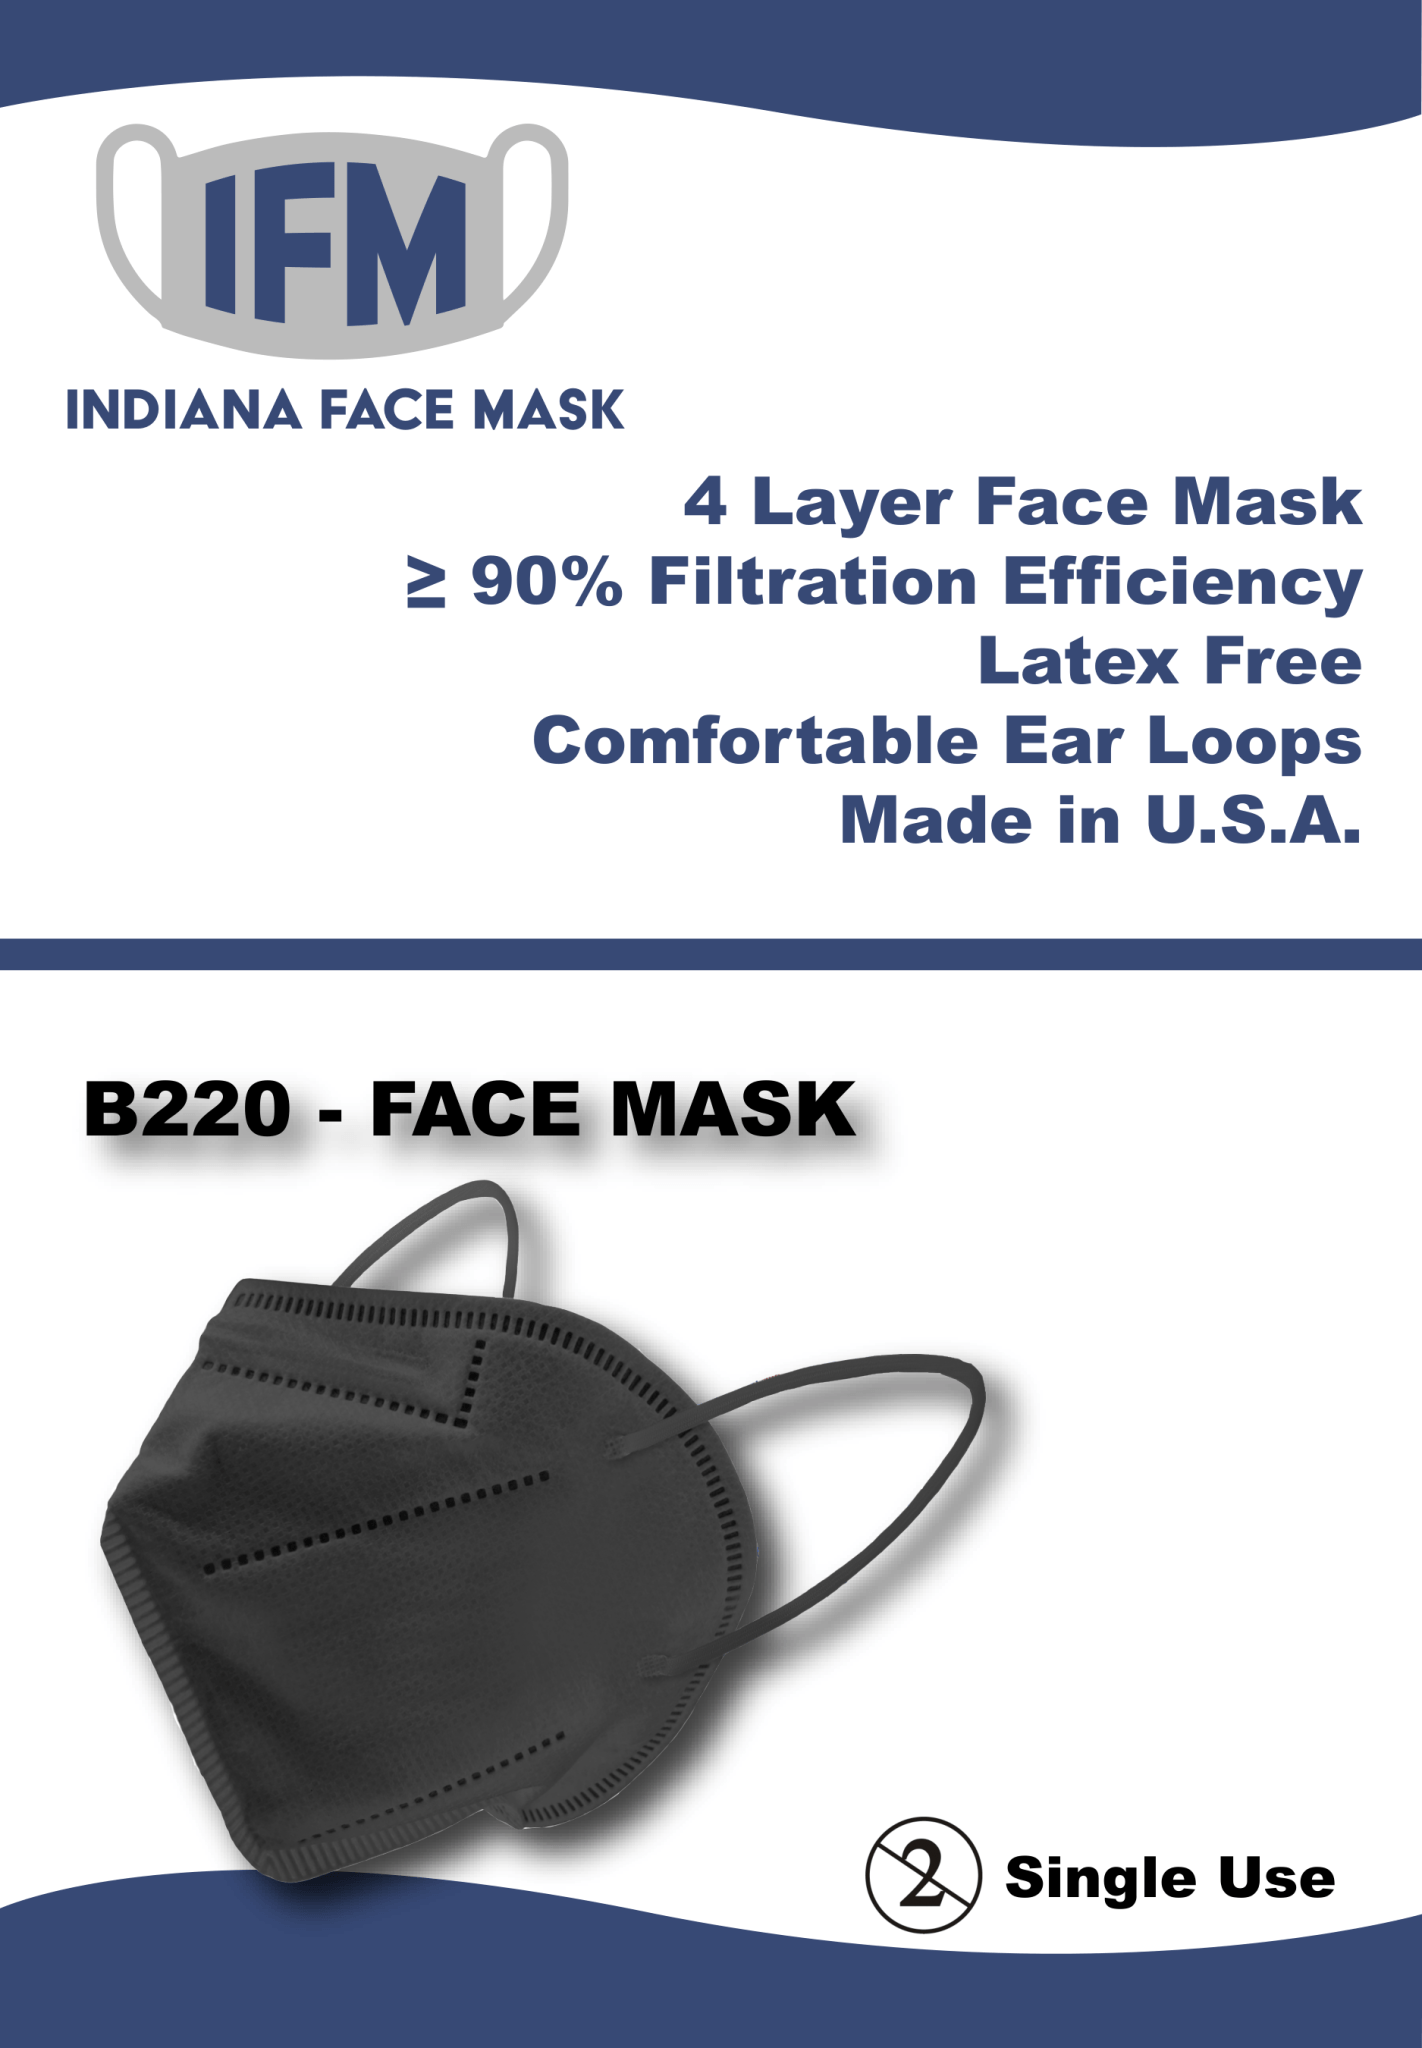 ASTM F33502 Barrier Face Covering, KN95 Style with Ear Loops